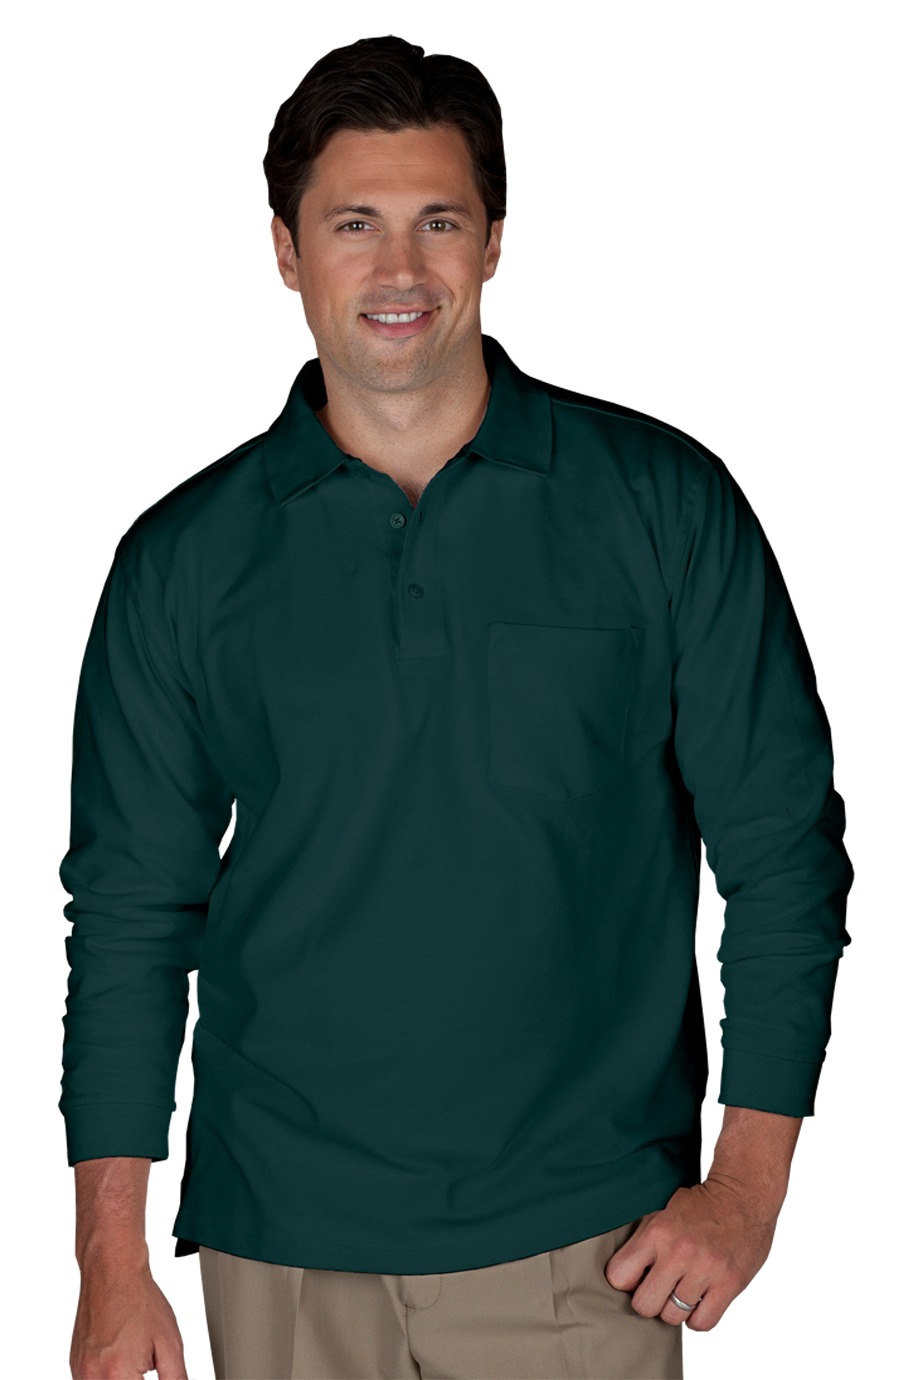 Edwards Garment 1525 - Unisex Long Sleeve Pique Polo with Pockets